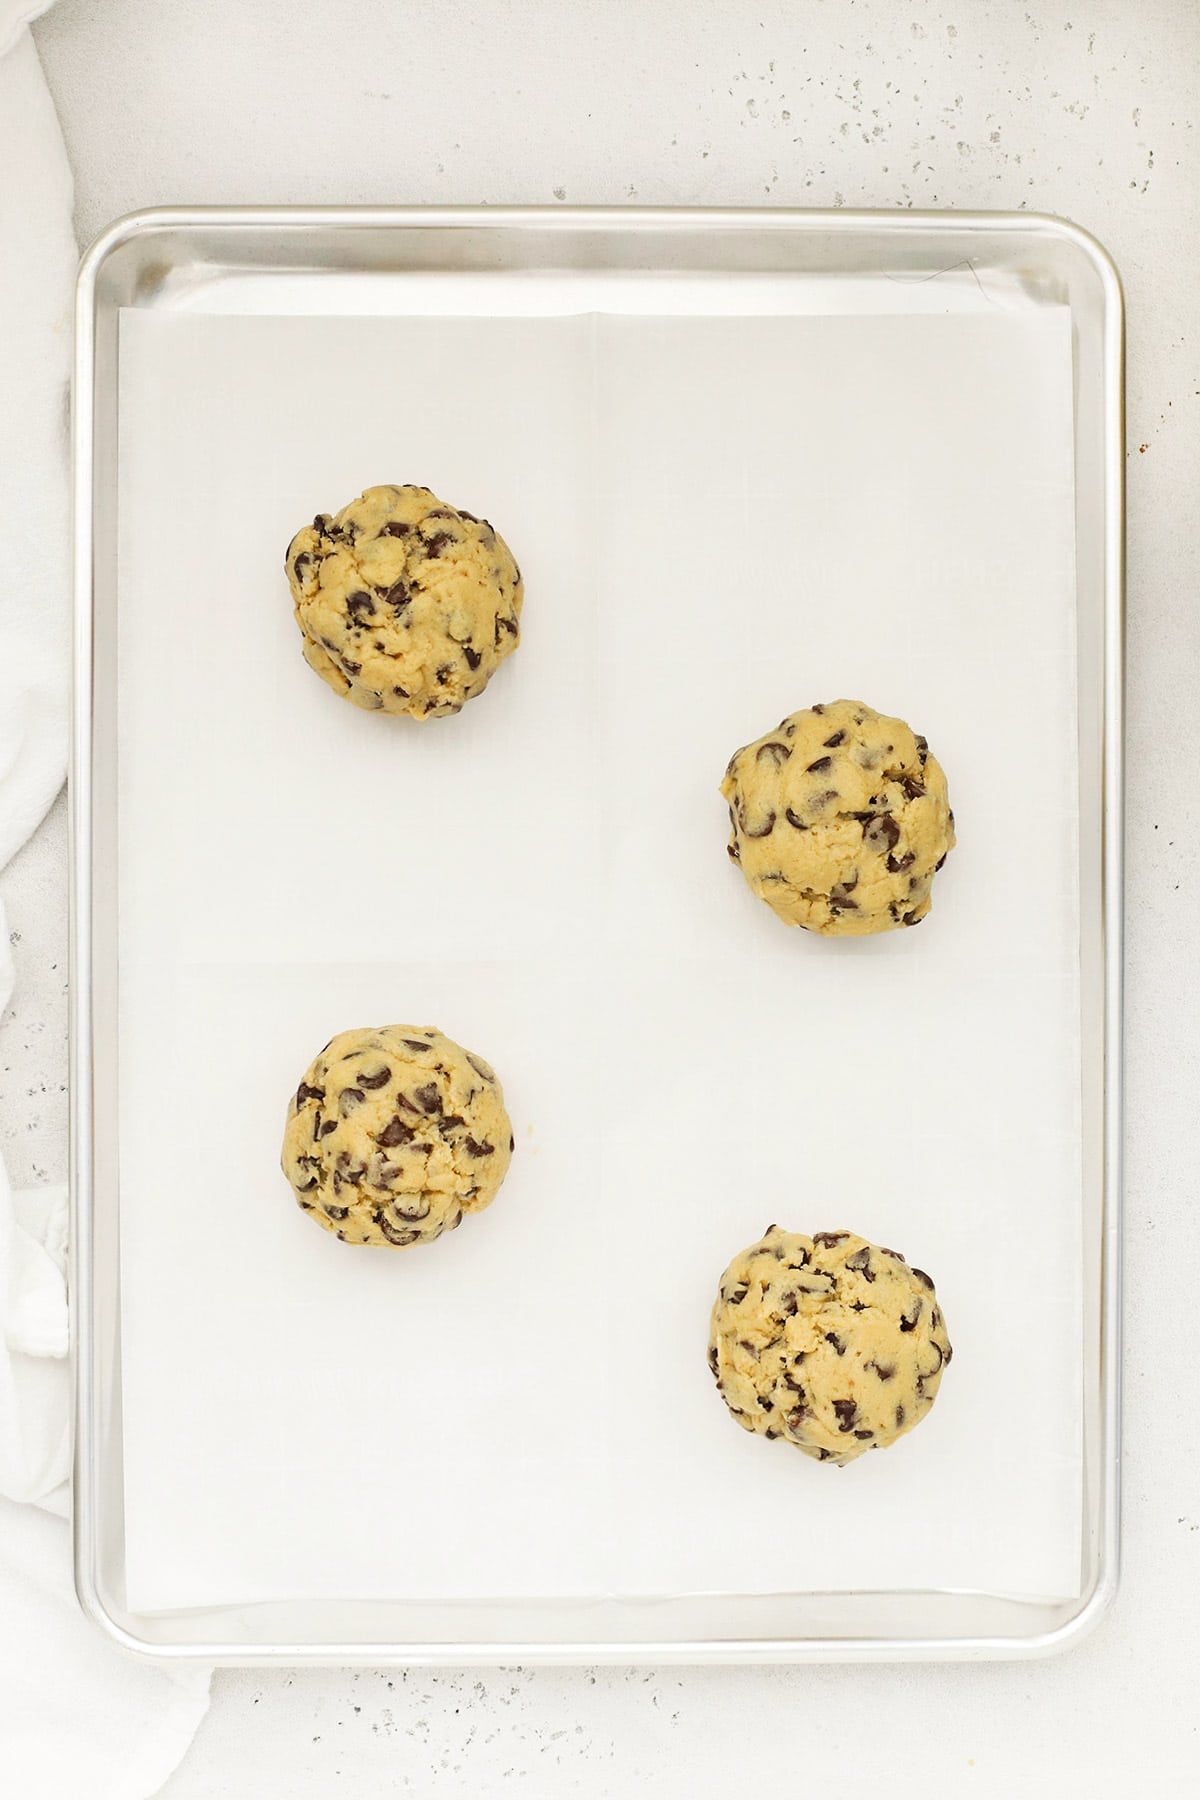 Four large balls of gluten-free Levain chocolate chip cookie dough on a baking sheet, ready to go into the oven